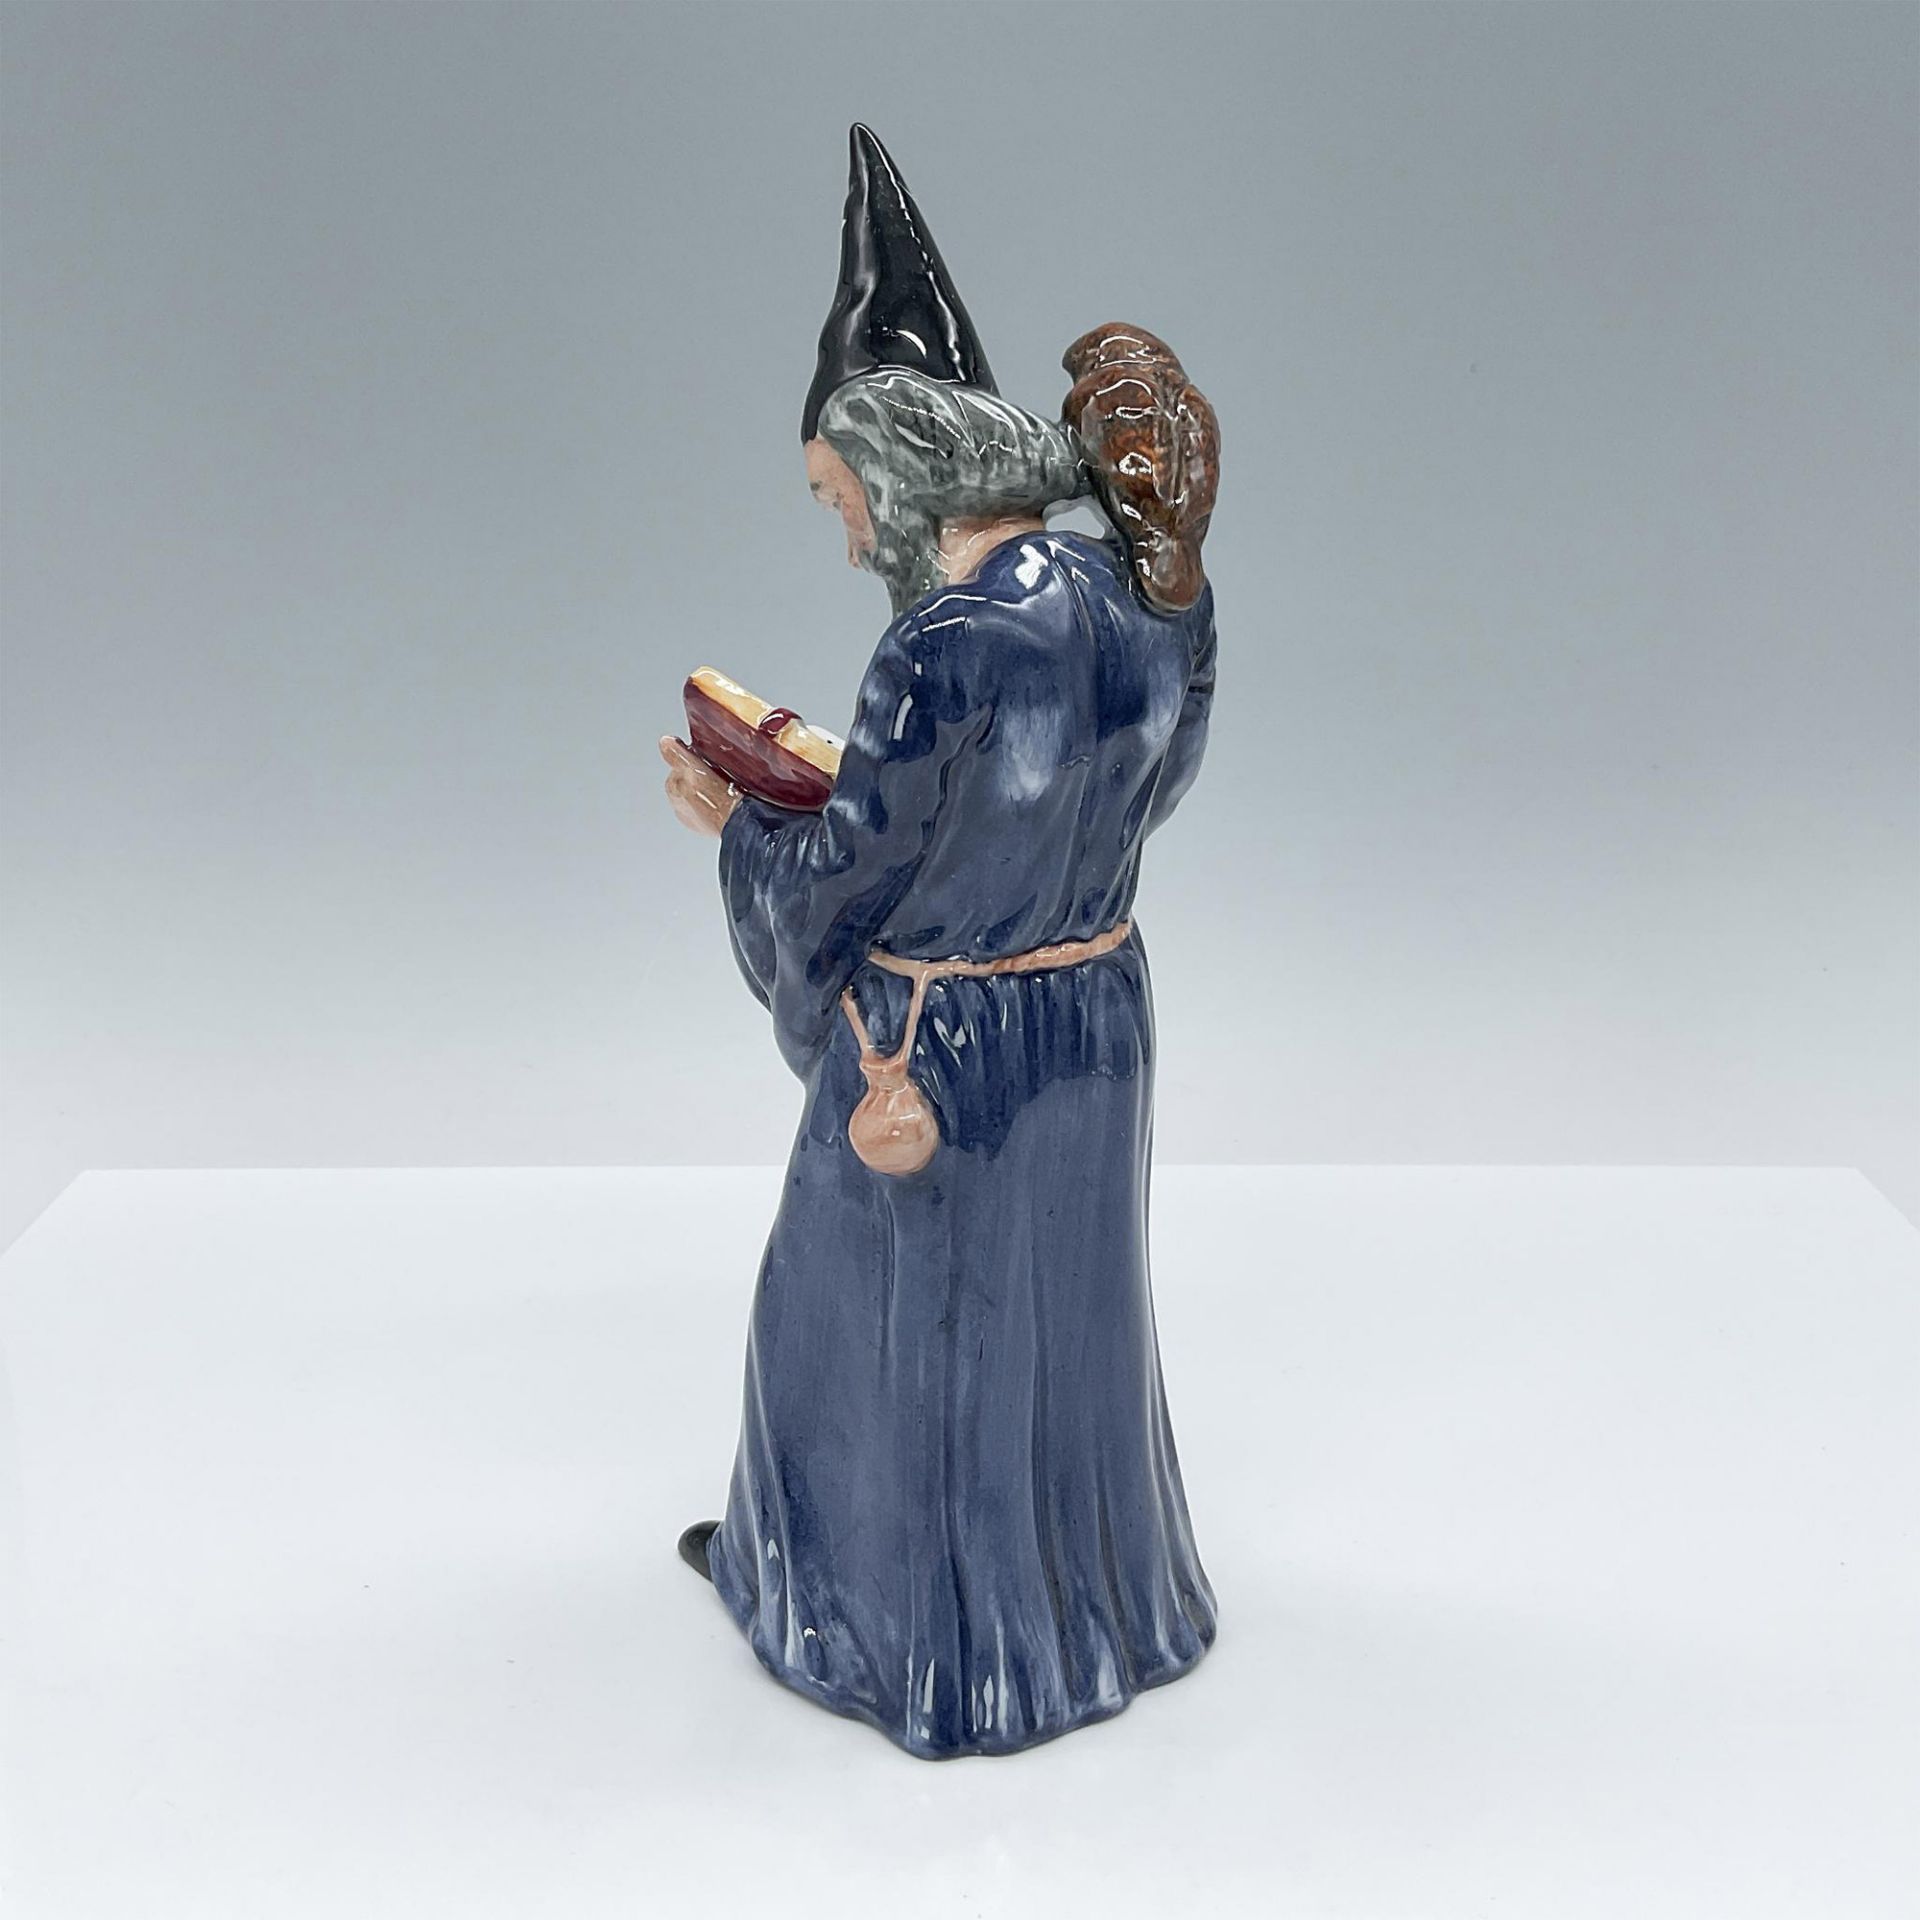 Wizard - HN2877 - Royal Doulton Figurine - Image 2 of 3